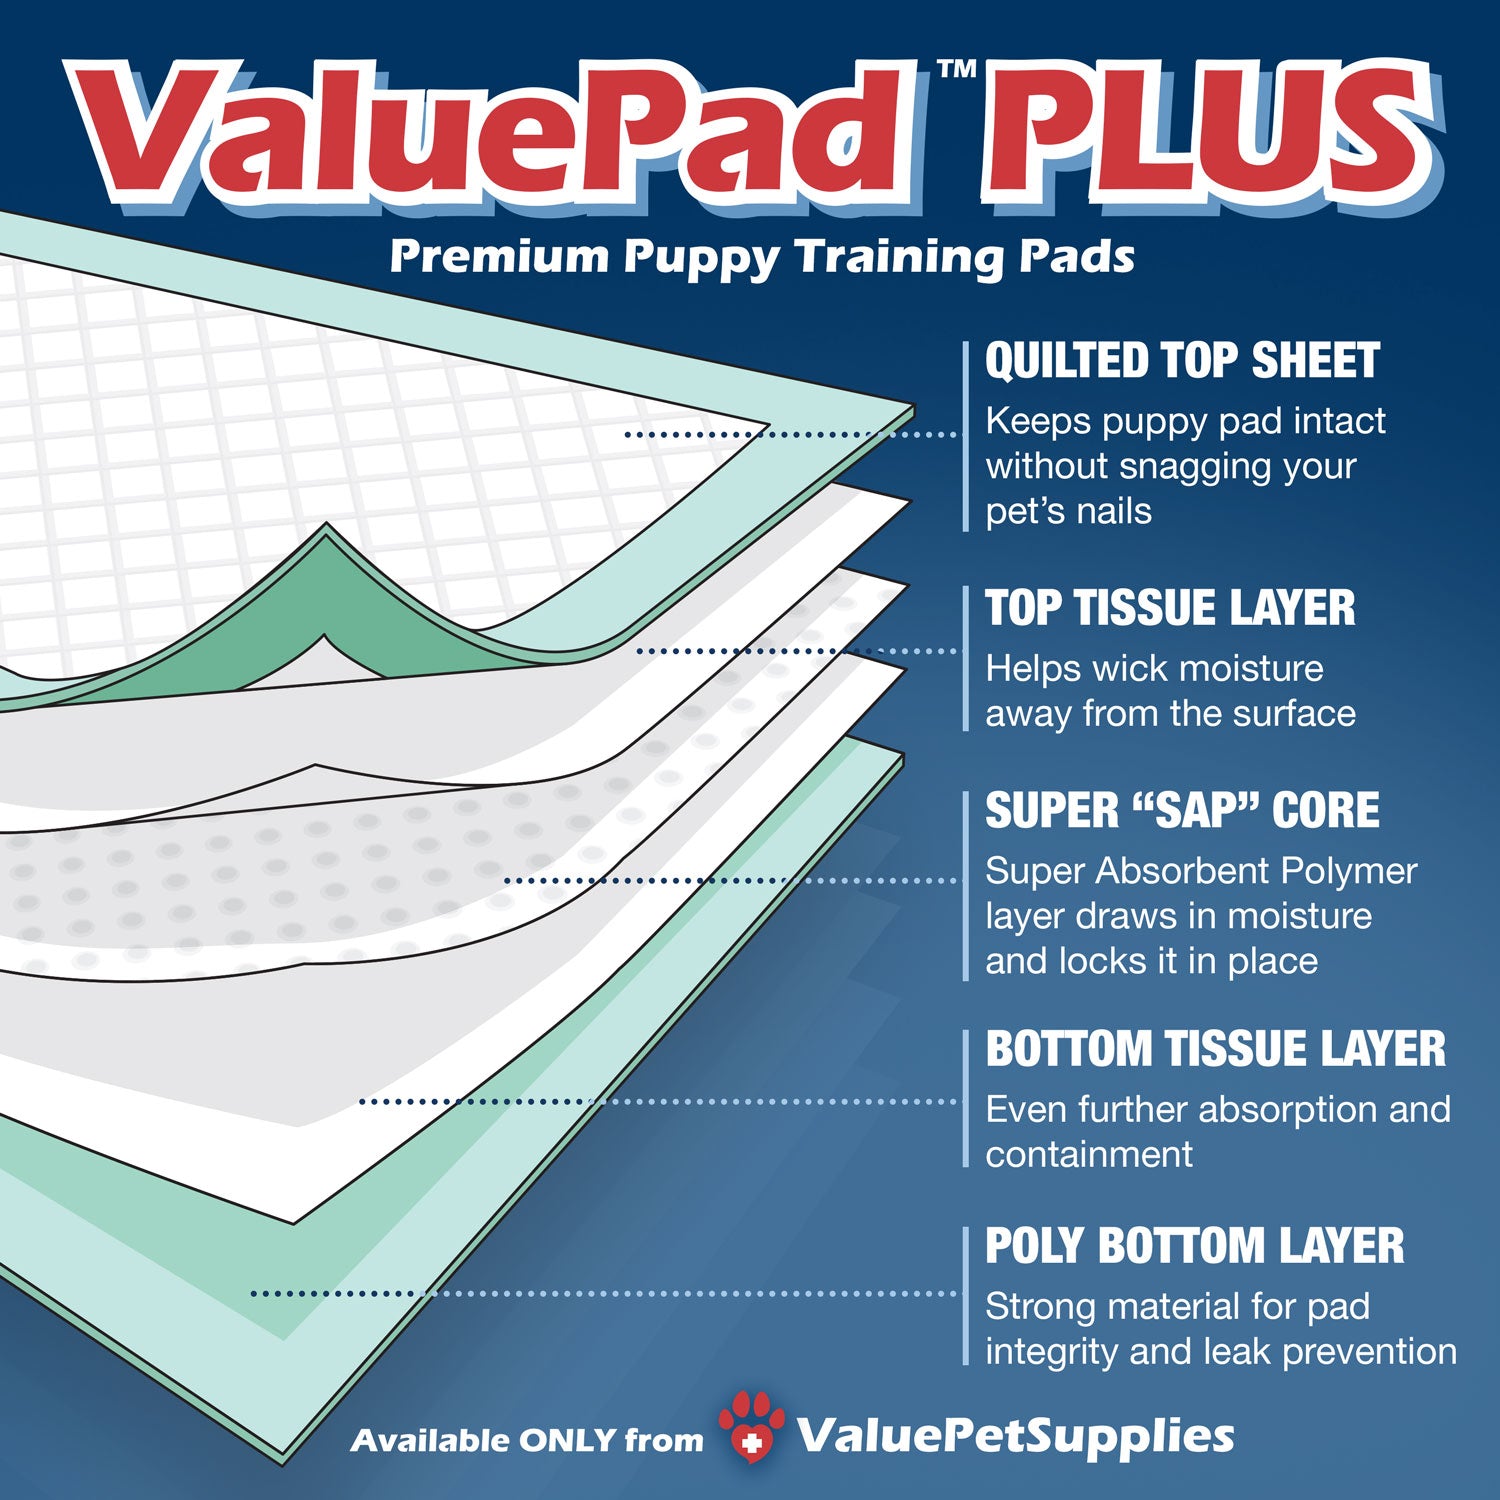 ValuePad Plus Puppy Pads, Small 17x24 Inch, 200 Count